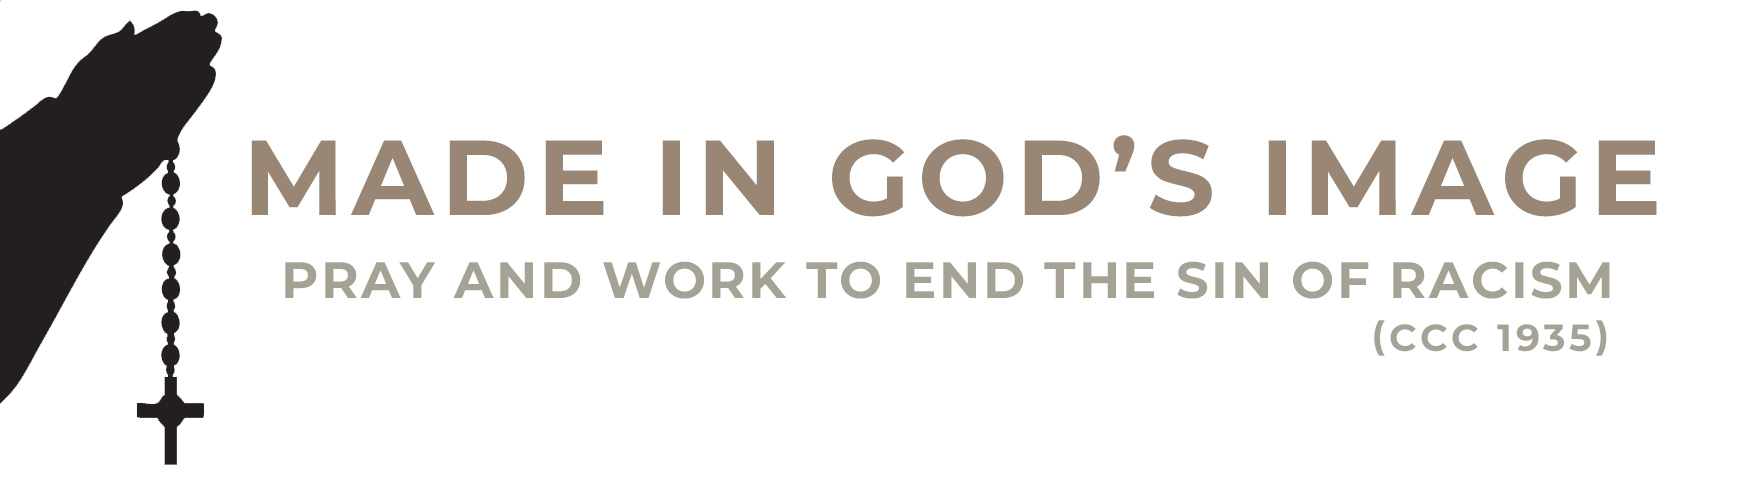 Made in God's Image: Pray and Work the End the Sin of Racism